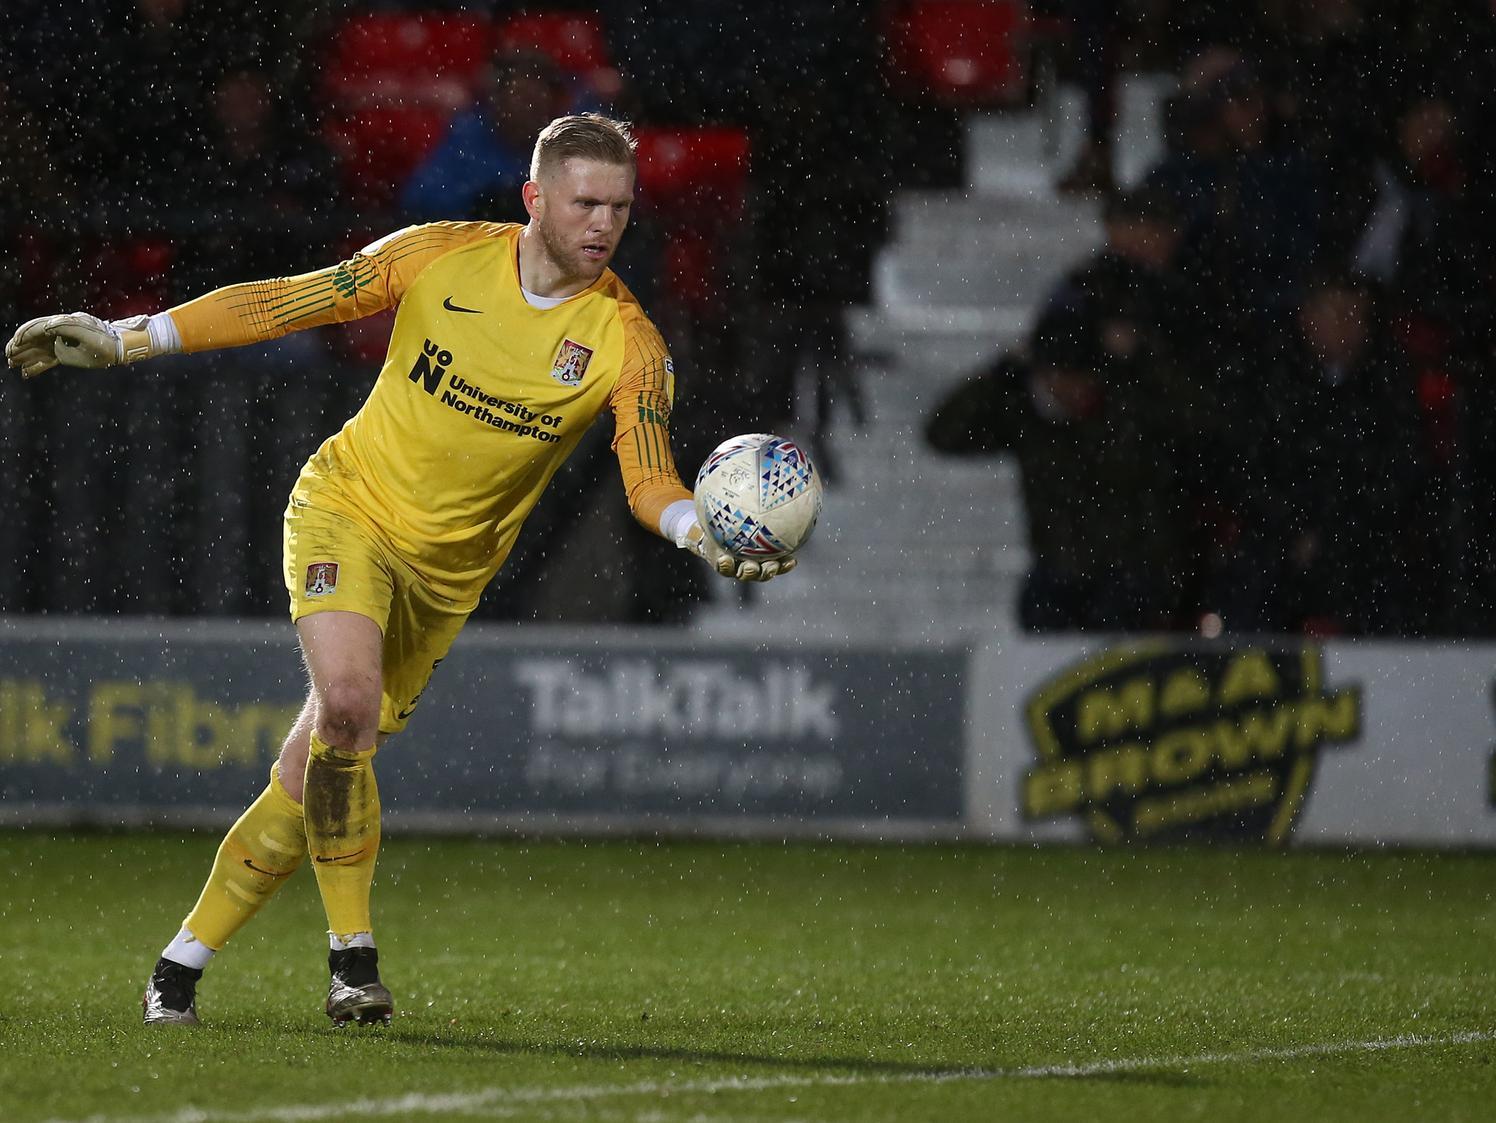 Derby County are weighing up a move for Northampton Town goalkeeper David Cornell alongside Blackburn Rovers and Ipswich Town. (Football Insider)